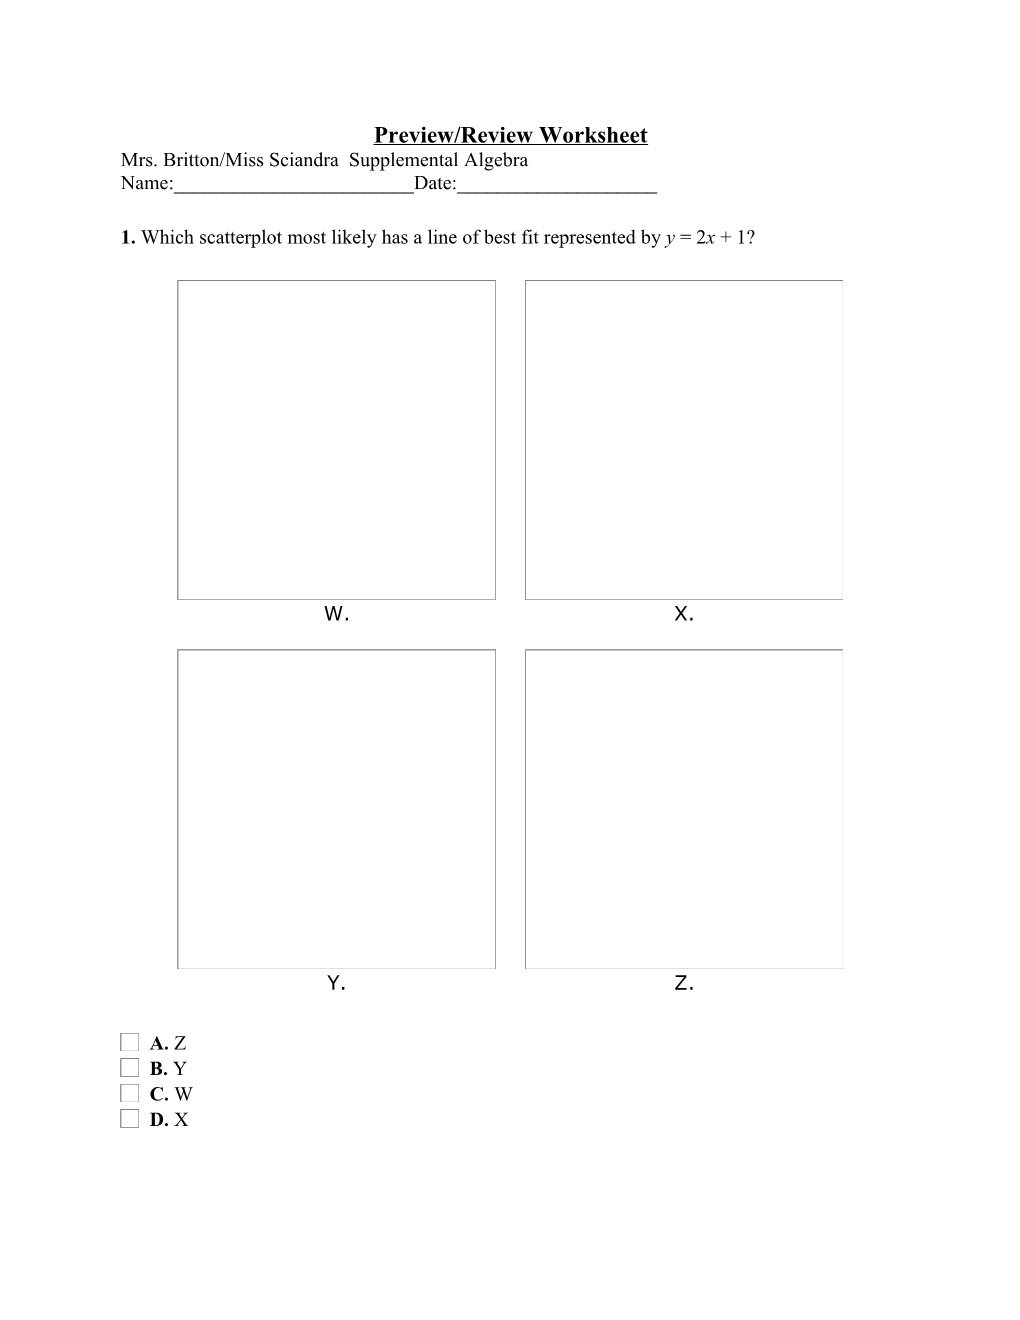 Preview/Review Worksheet s1